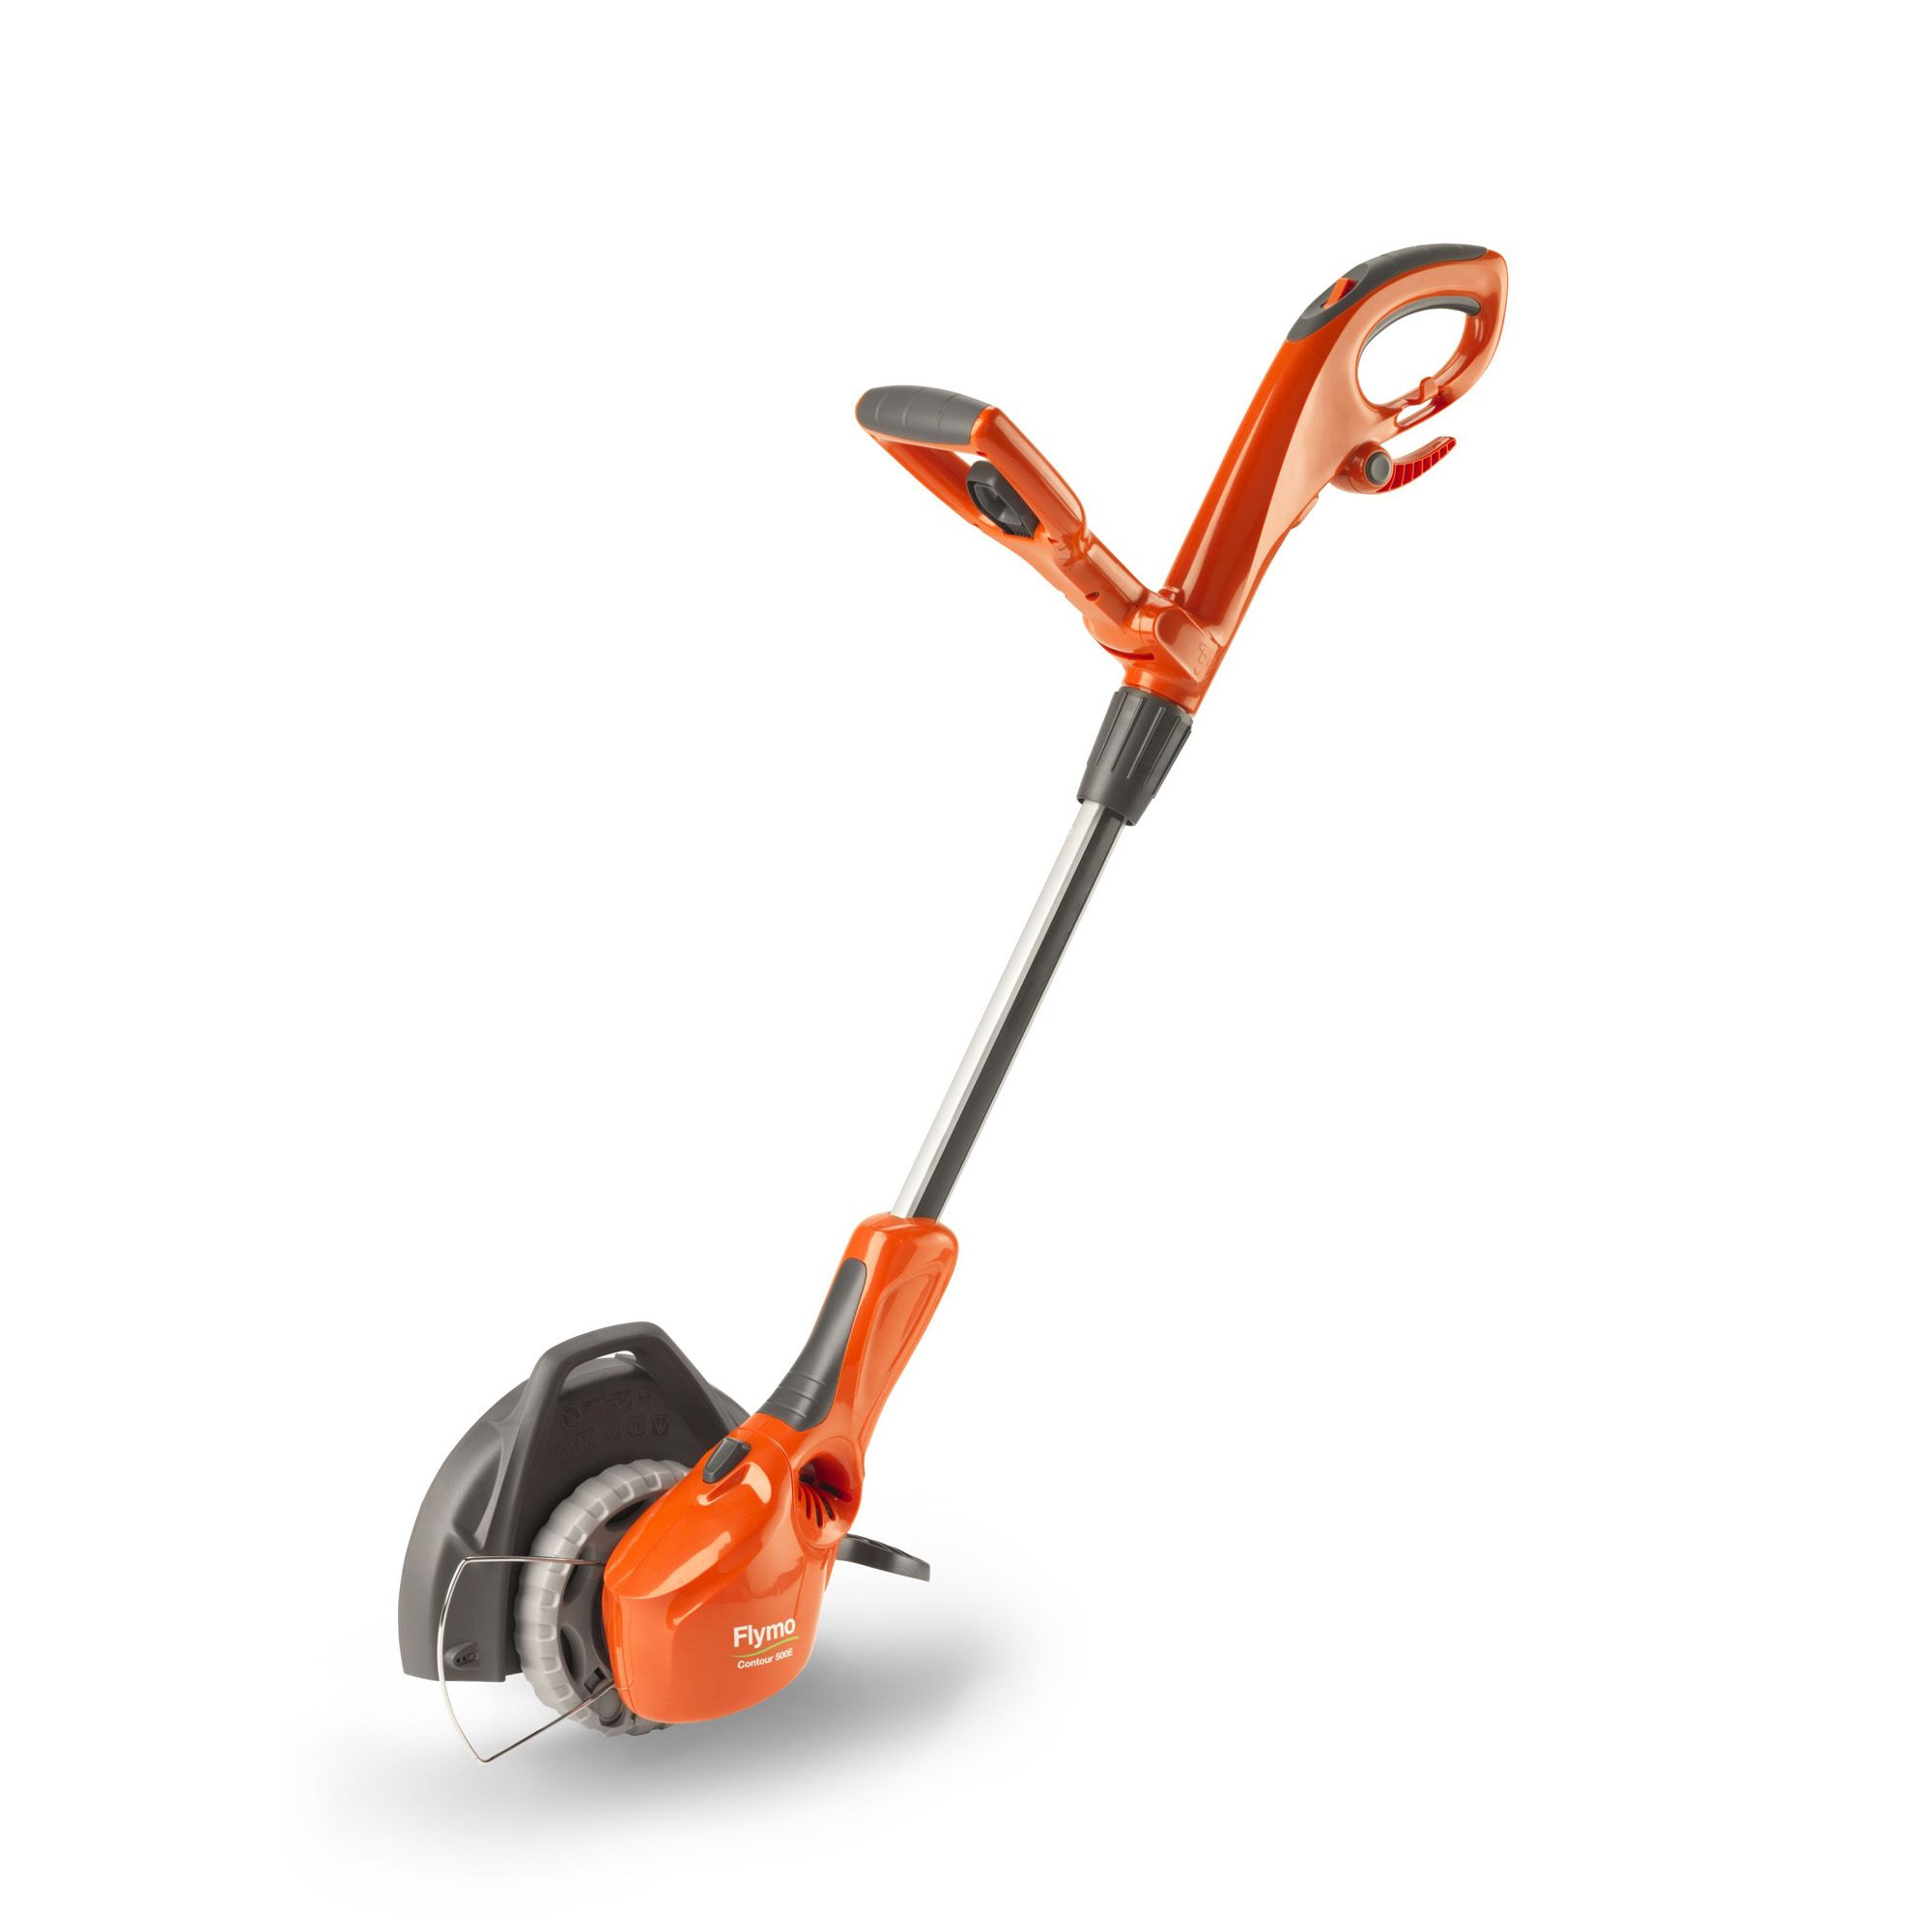 b&q strimmers for sale